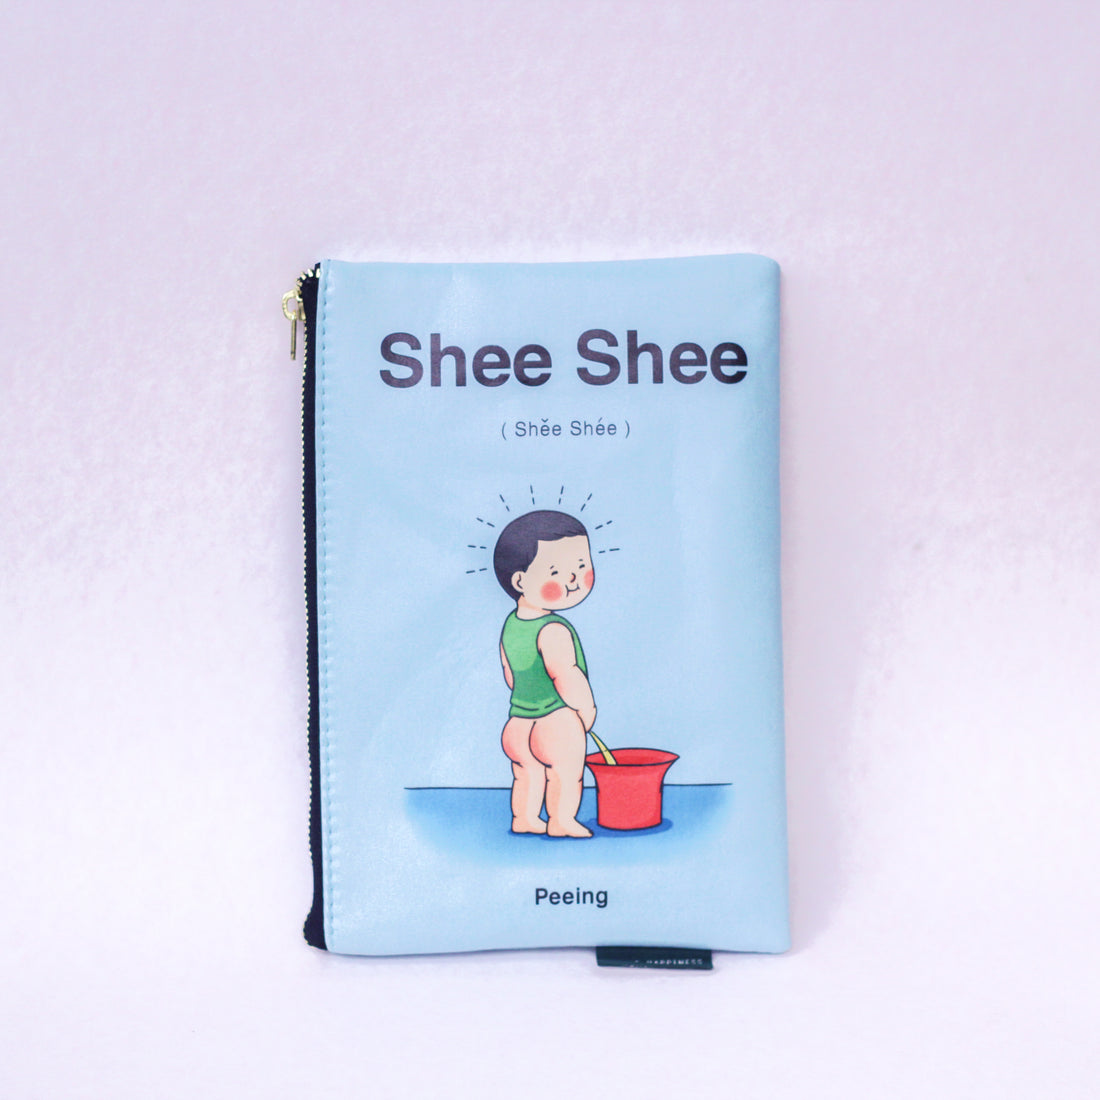 Shee Shee / Ngh Ngh Pouch